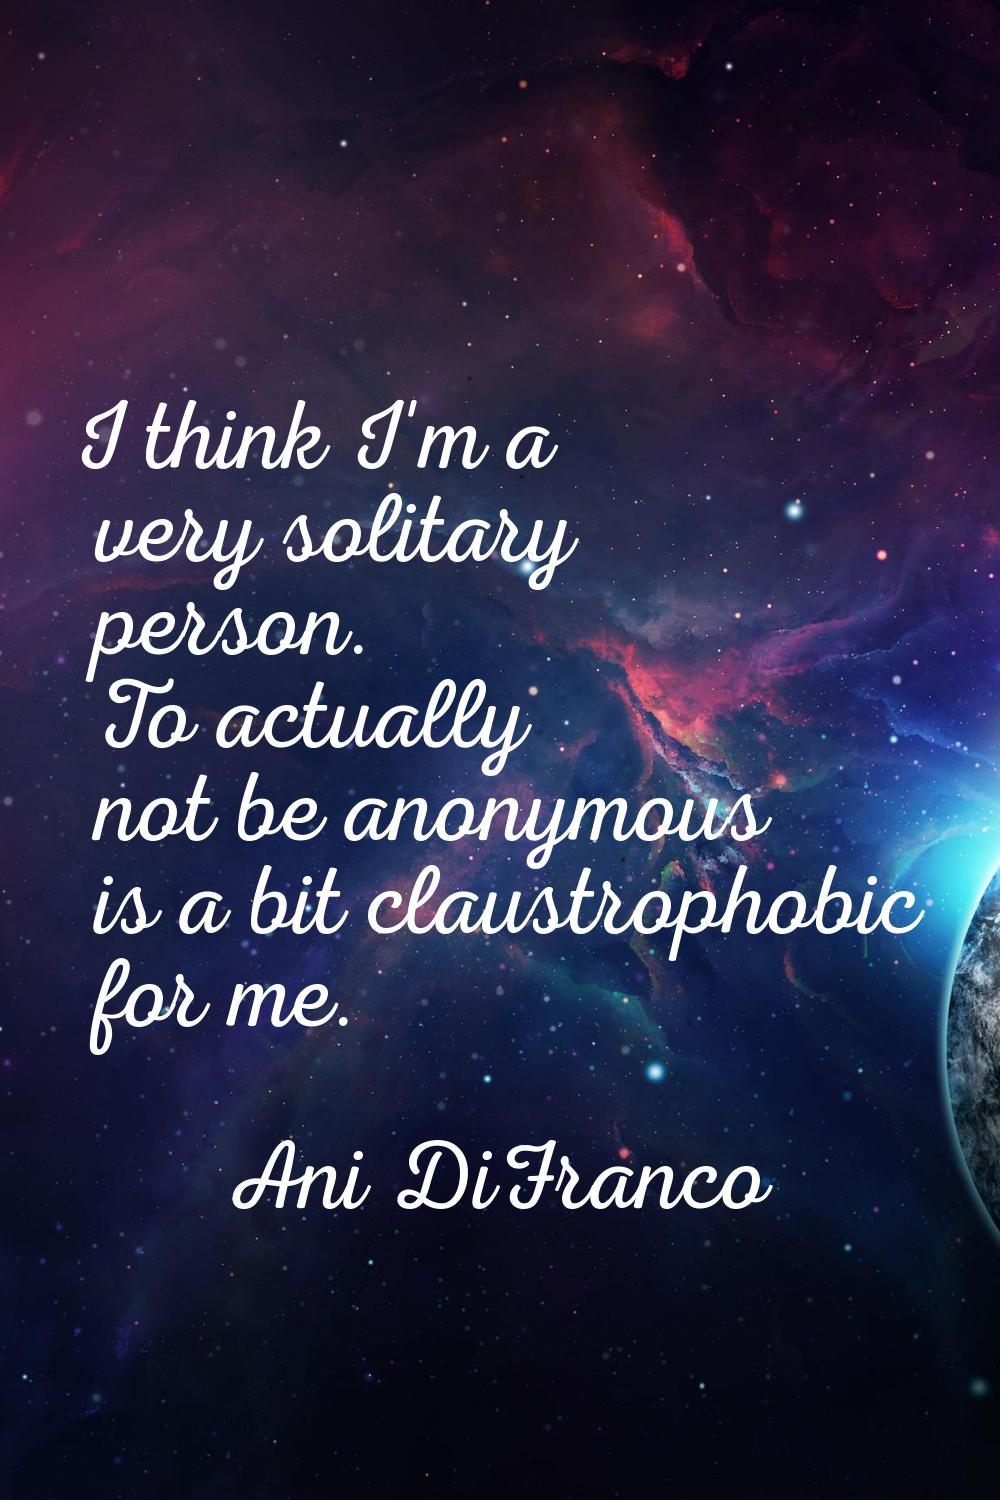 I think I'm a very solitary person. To actually not be anonymous is a bit claustrophobic for me.